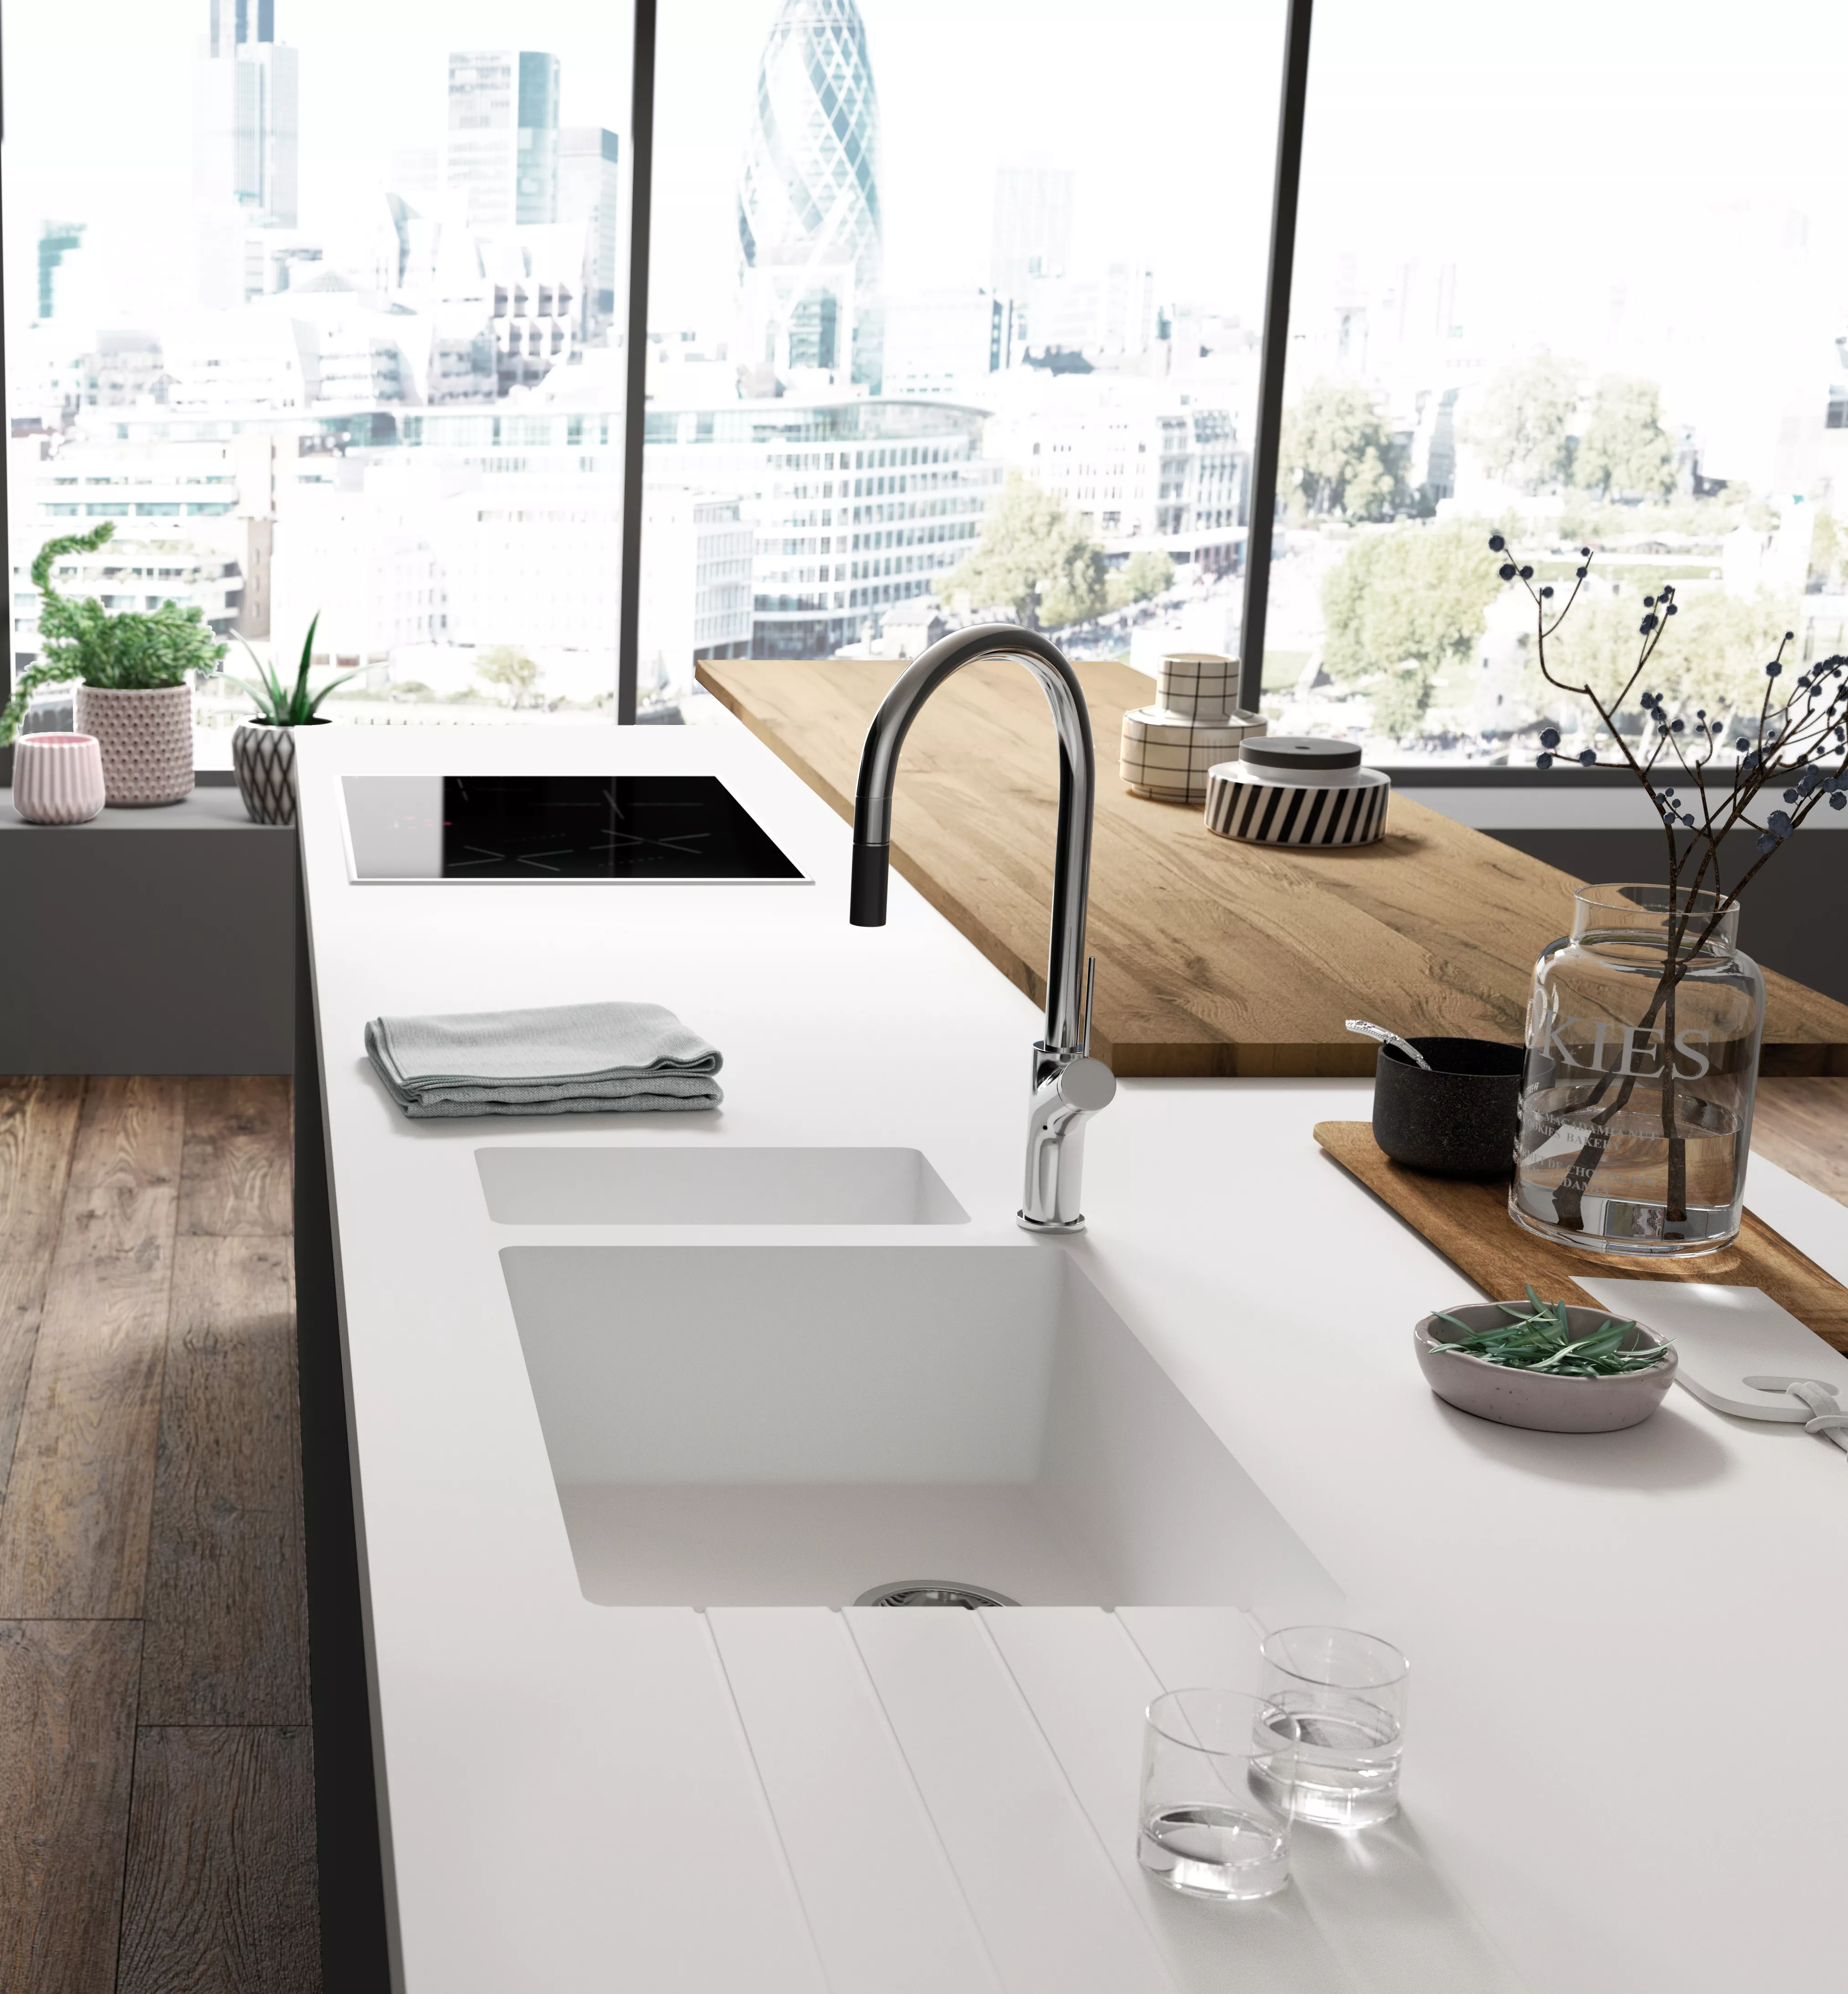 HIMACS launches its new collection of sinks and basins